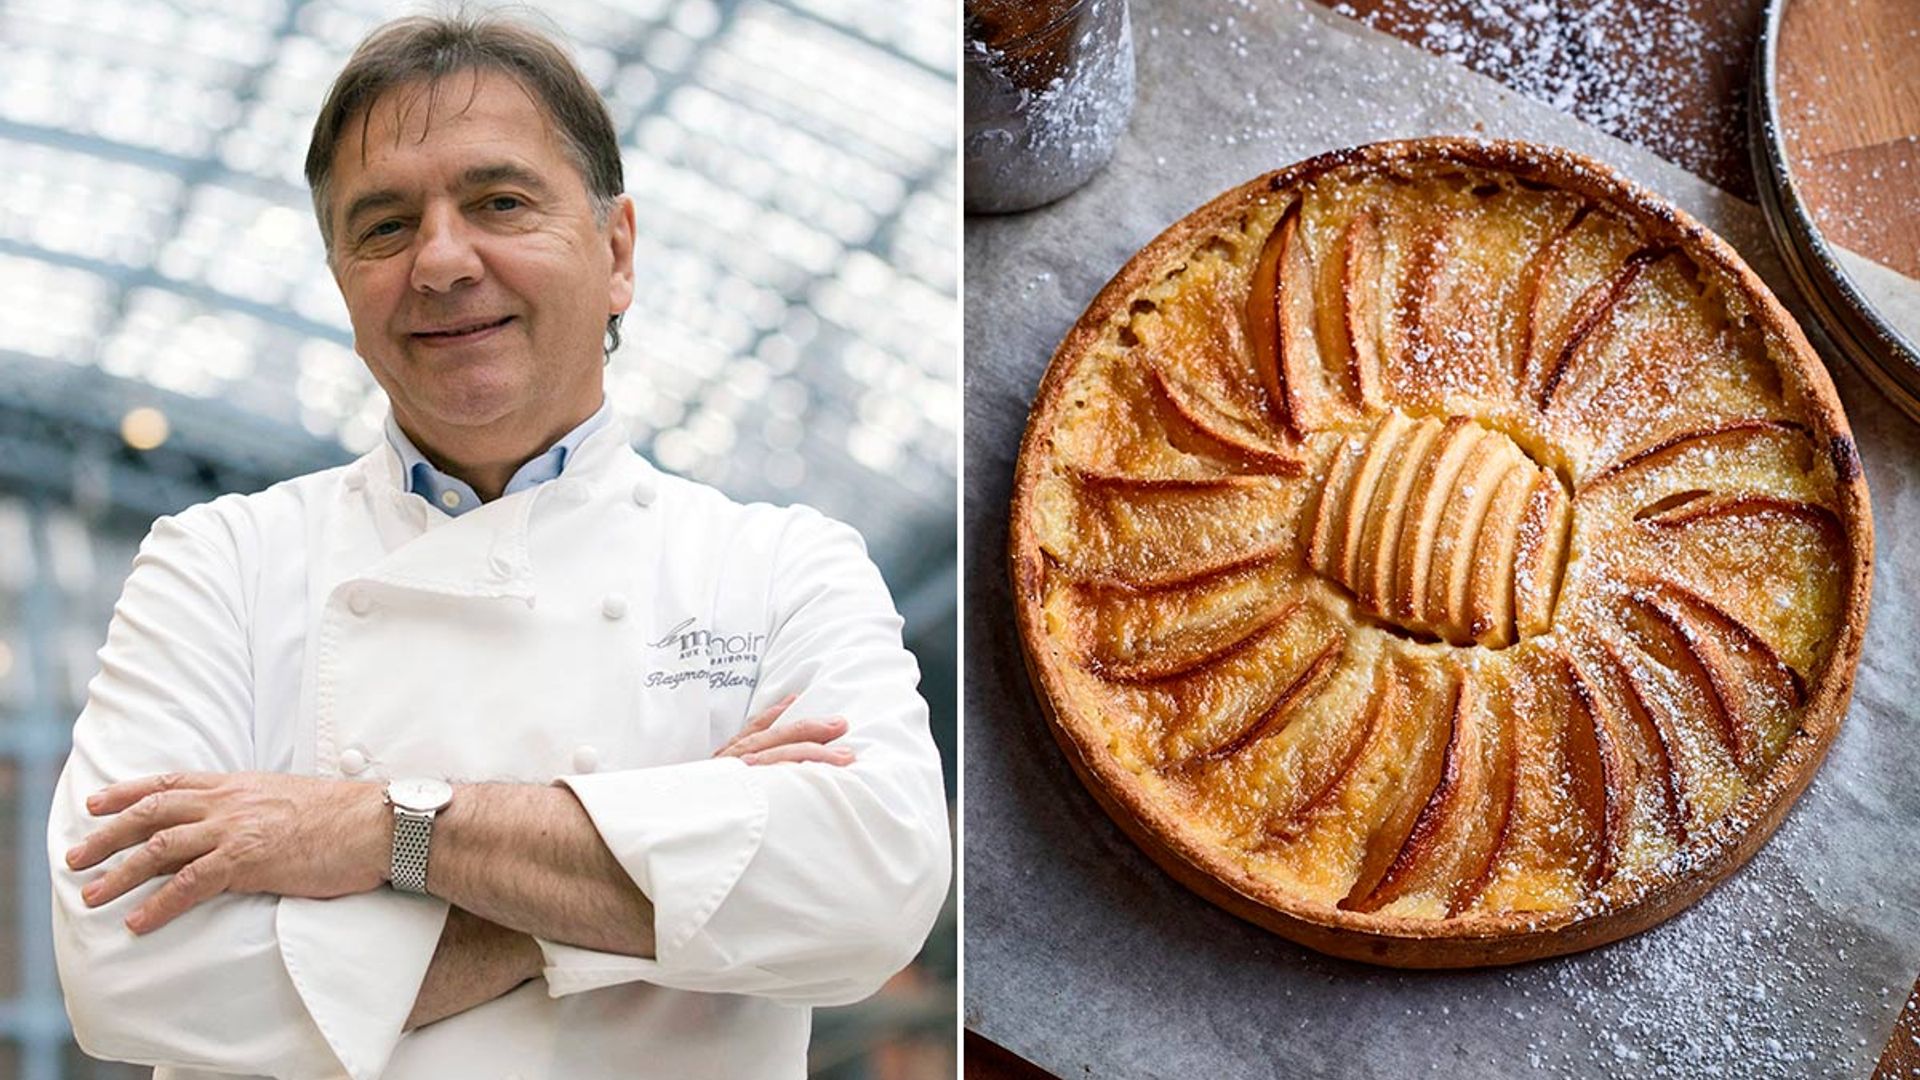 Interview: Raymond Blanc on creating his own orchard and his favourite winter pudding